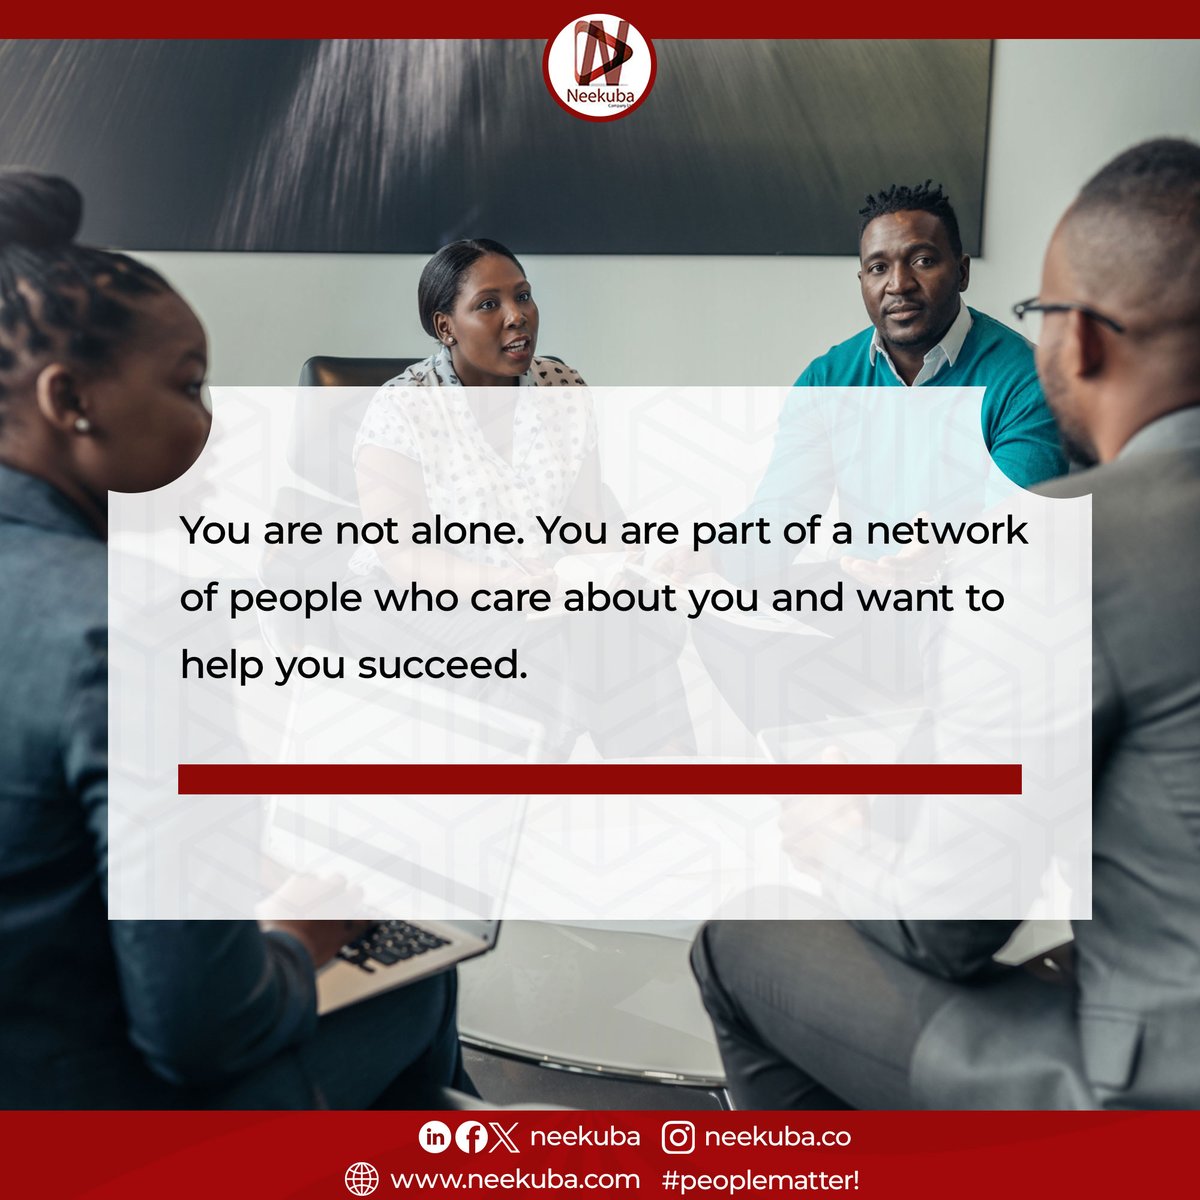 You are not alone. You are part of a network of people who care about you and want to help you succeed.

#neekuba #peoplematter #success #notalone